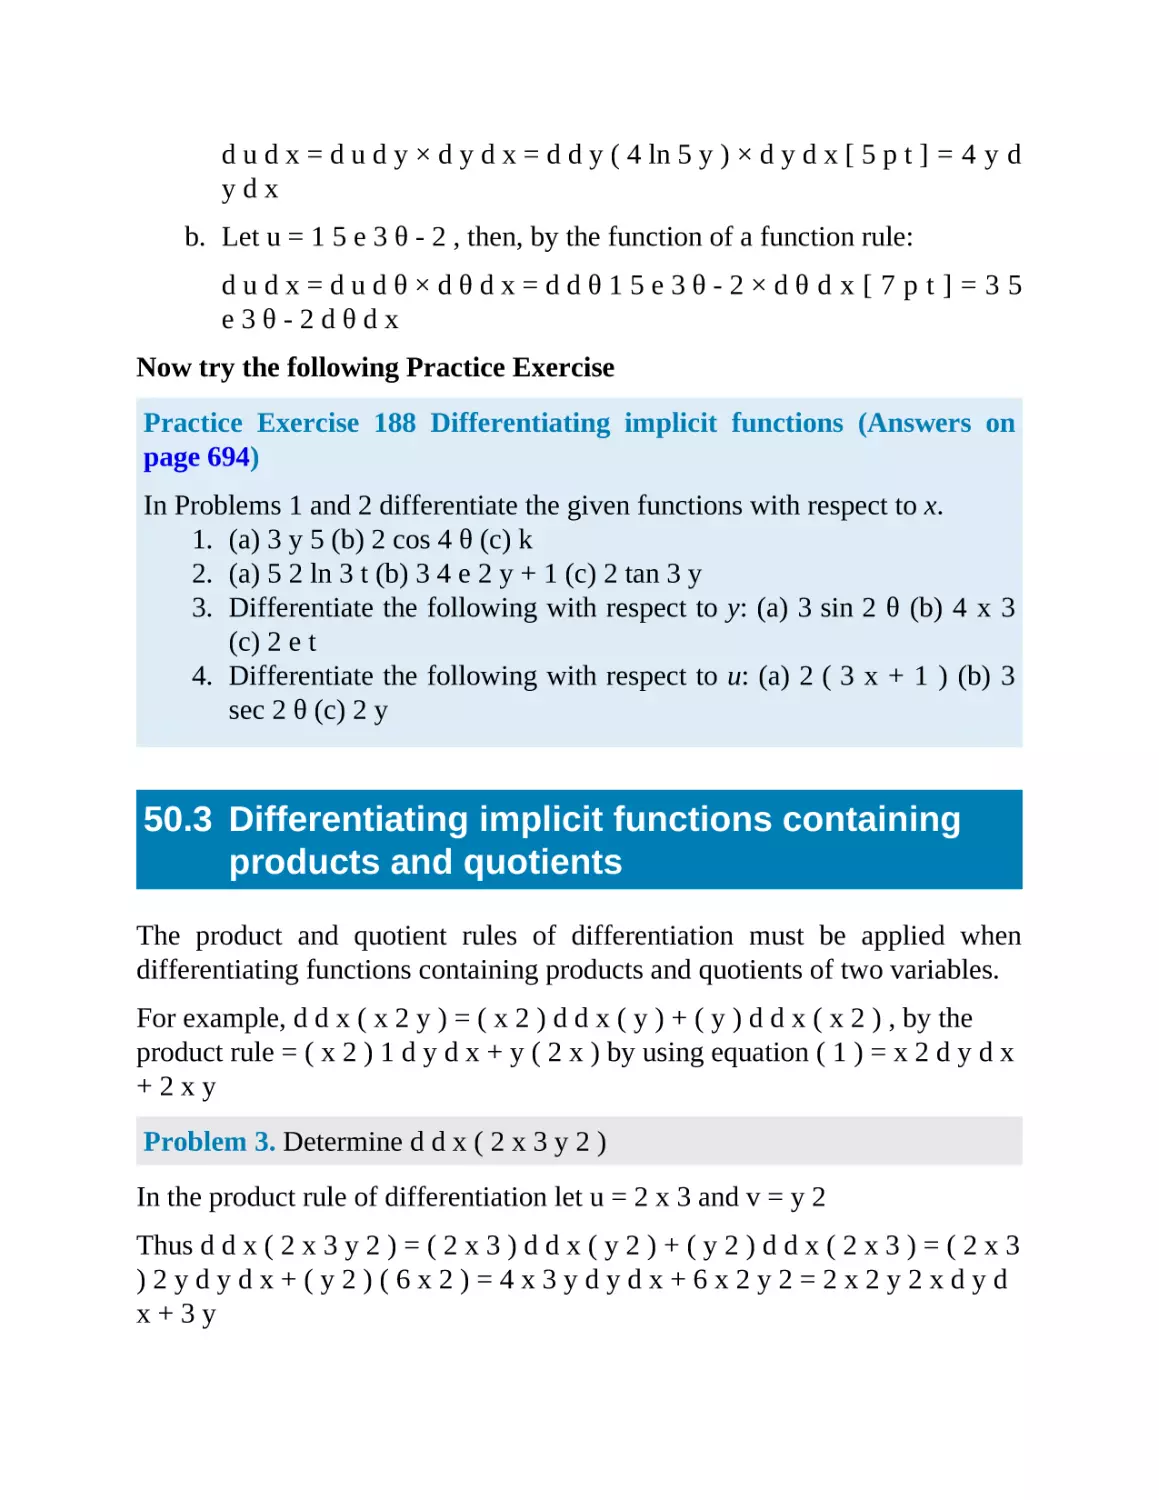 50.3 Differentiating implicit functions containing products and quotients